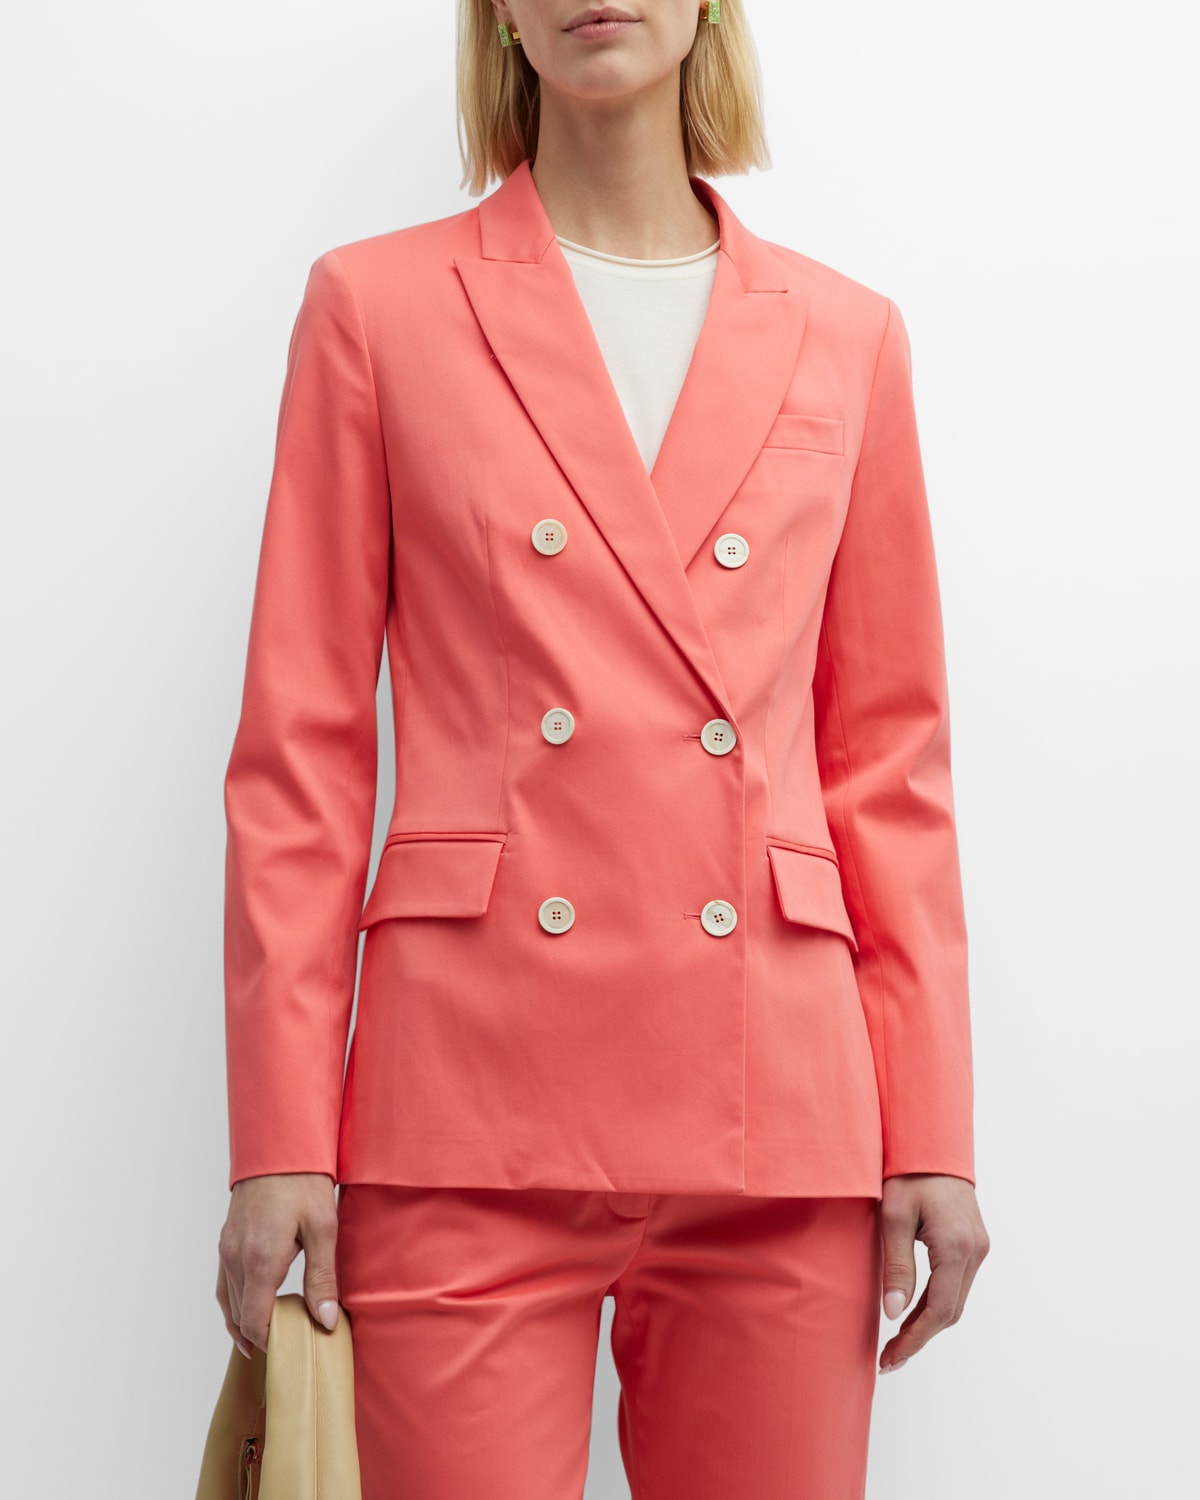 Cotton Double-Breasted Blazer Jacket